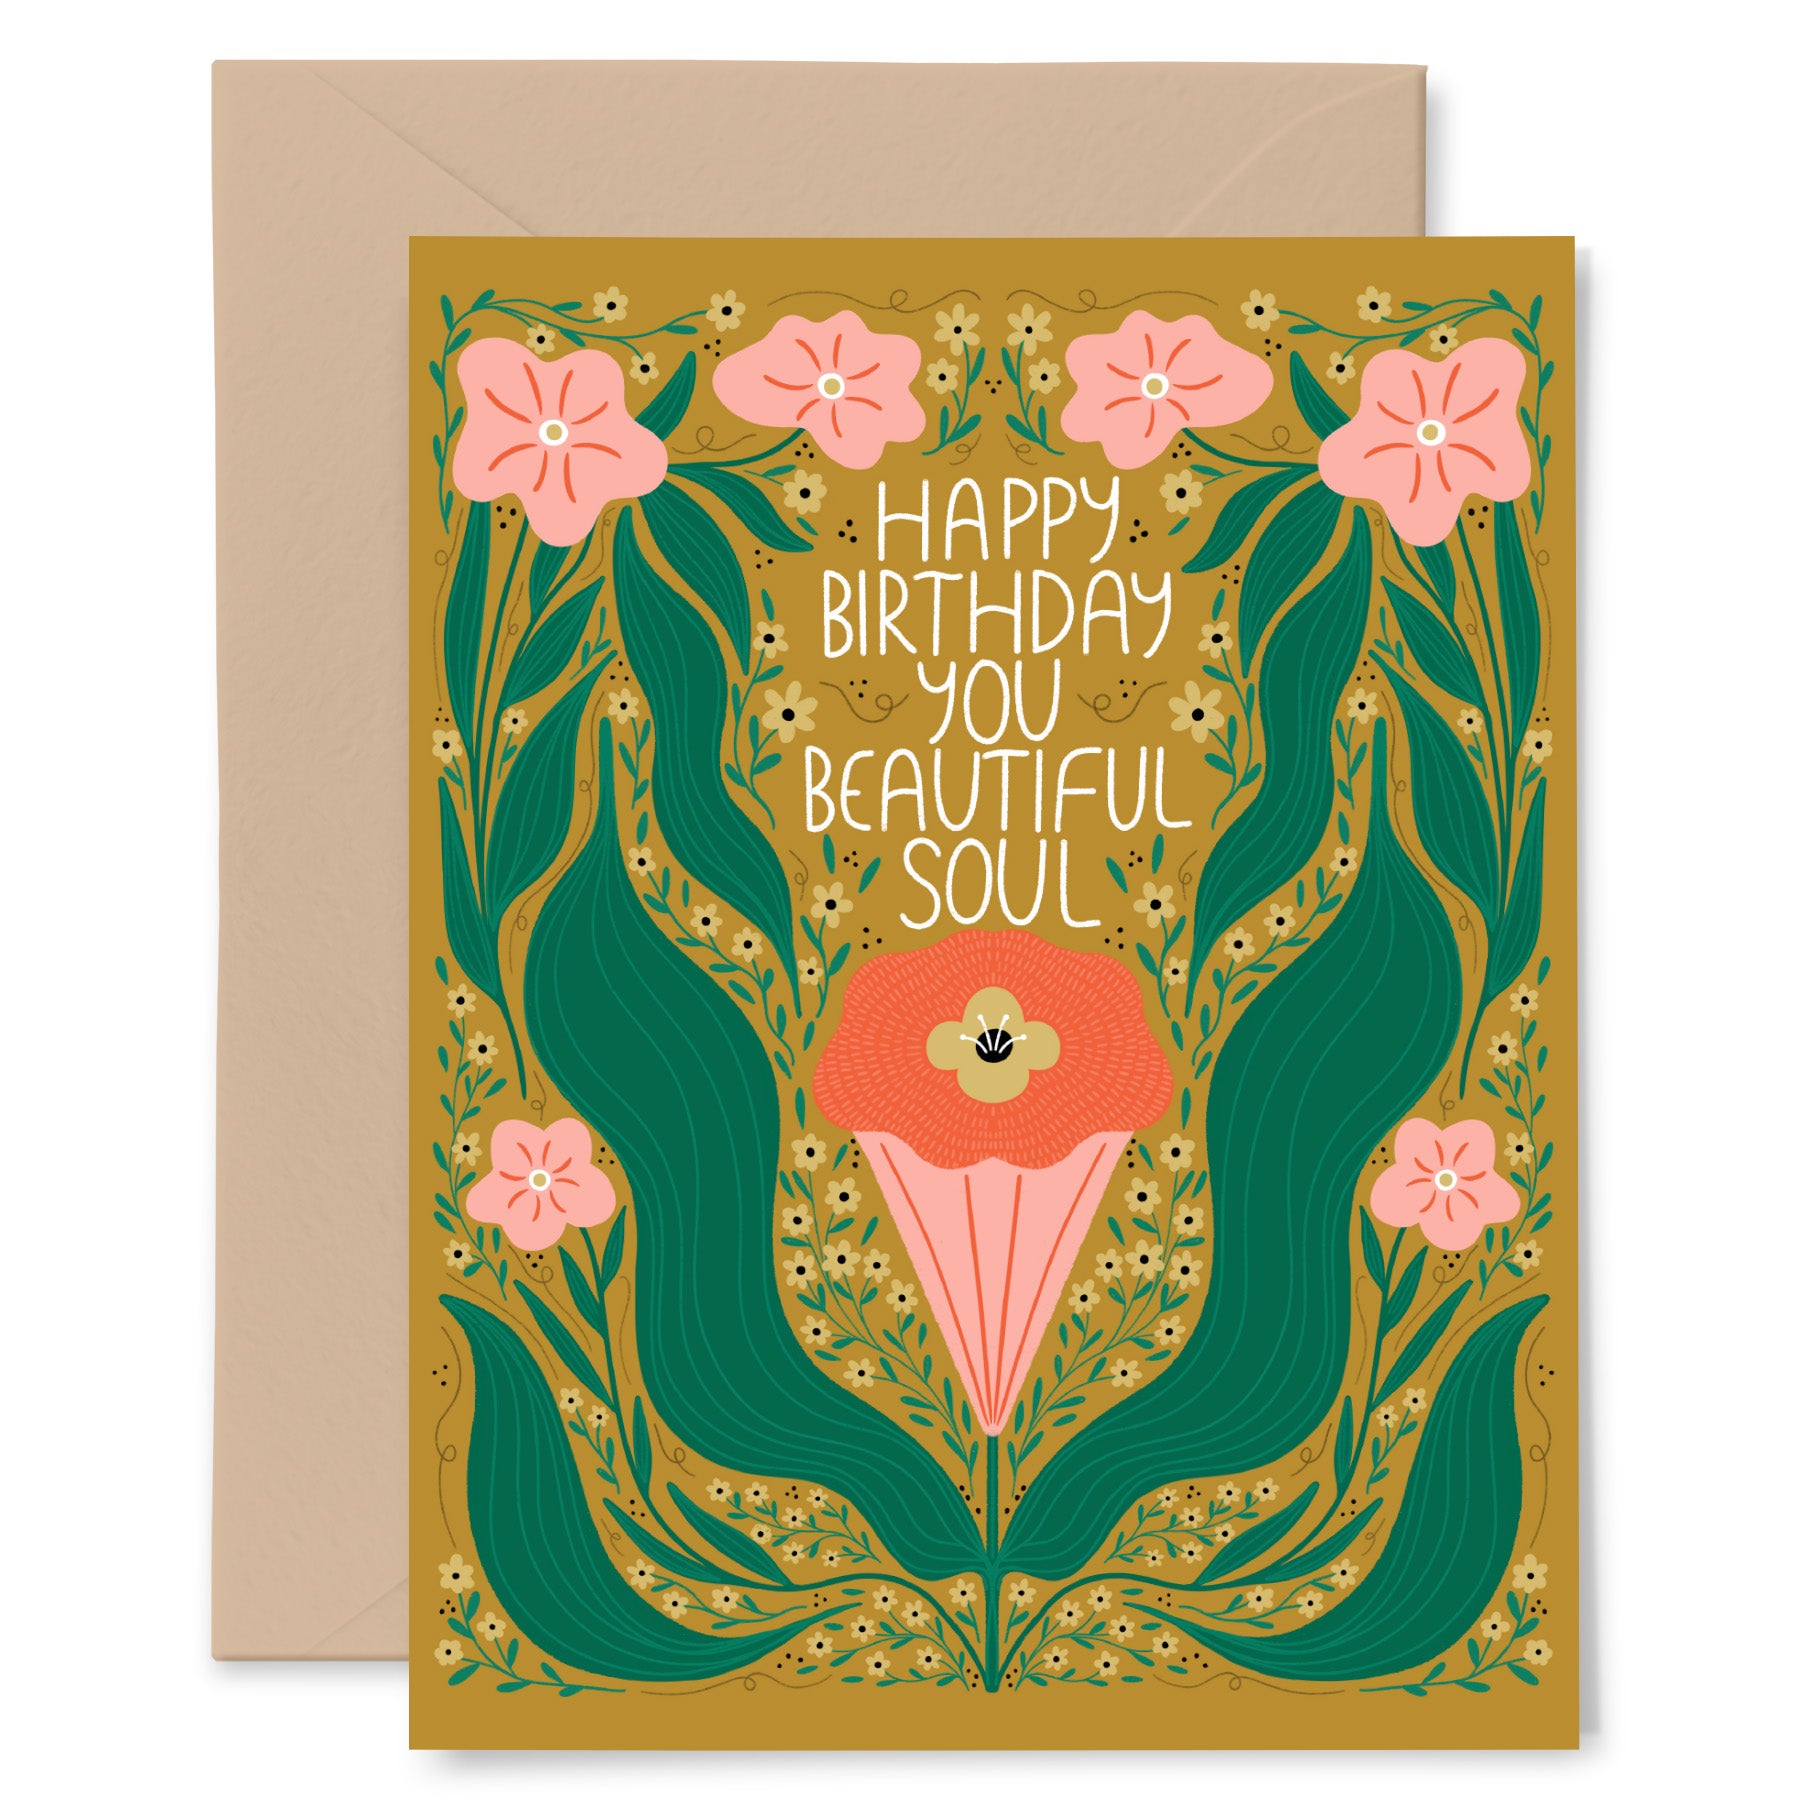 Stacie's Greeting & Note Cards